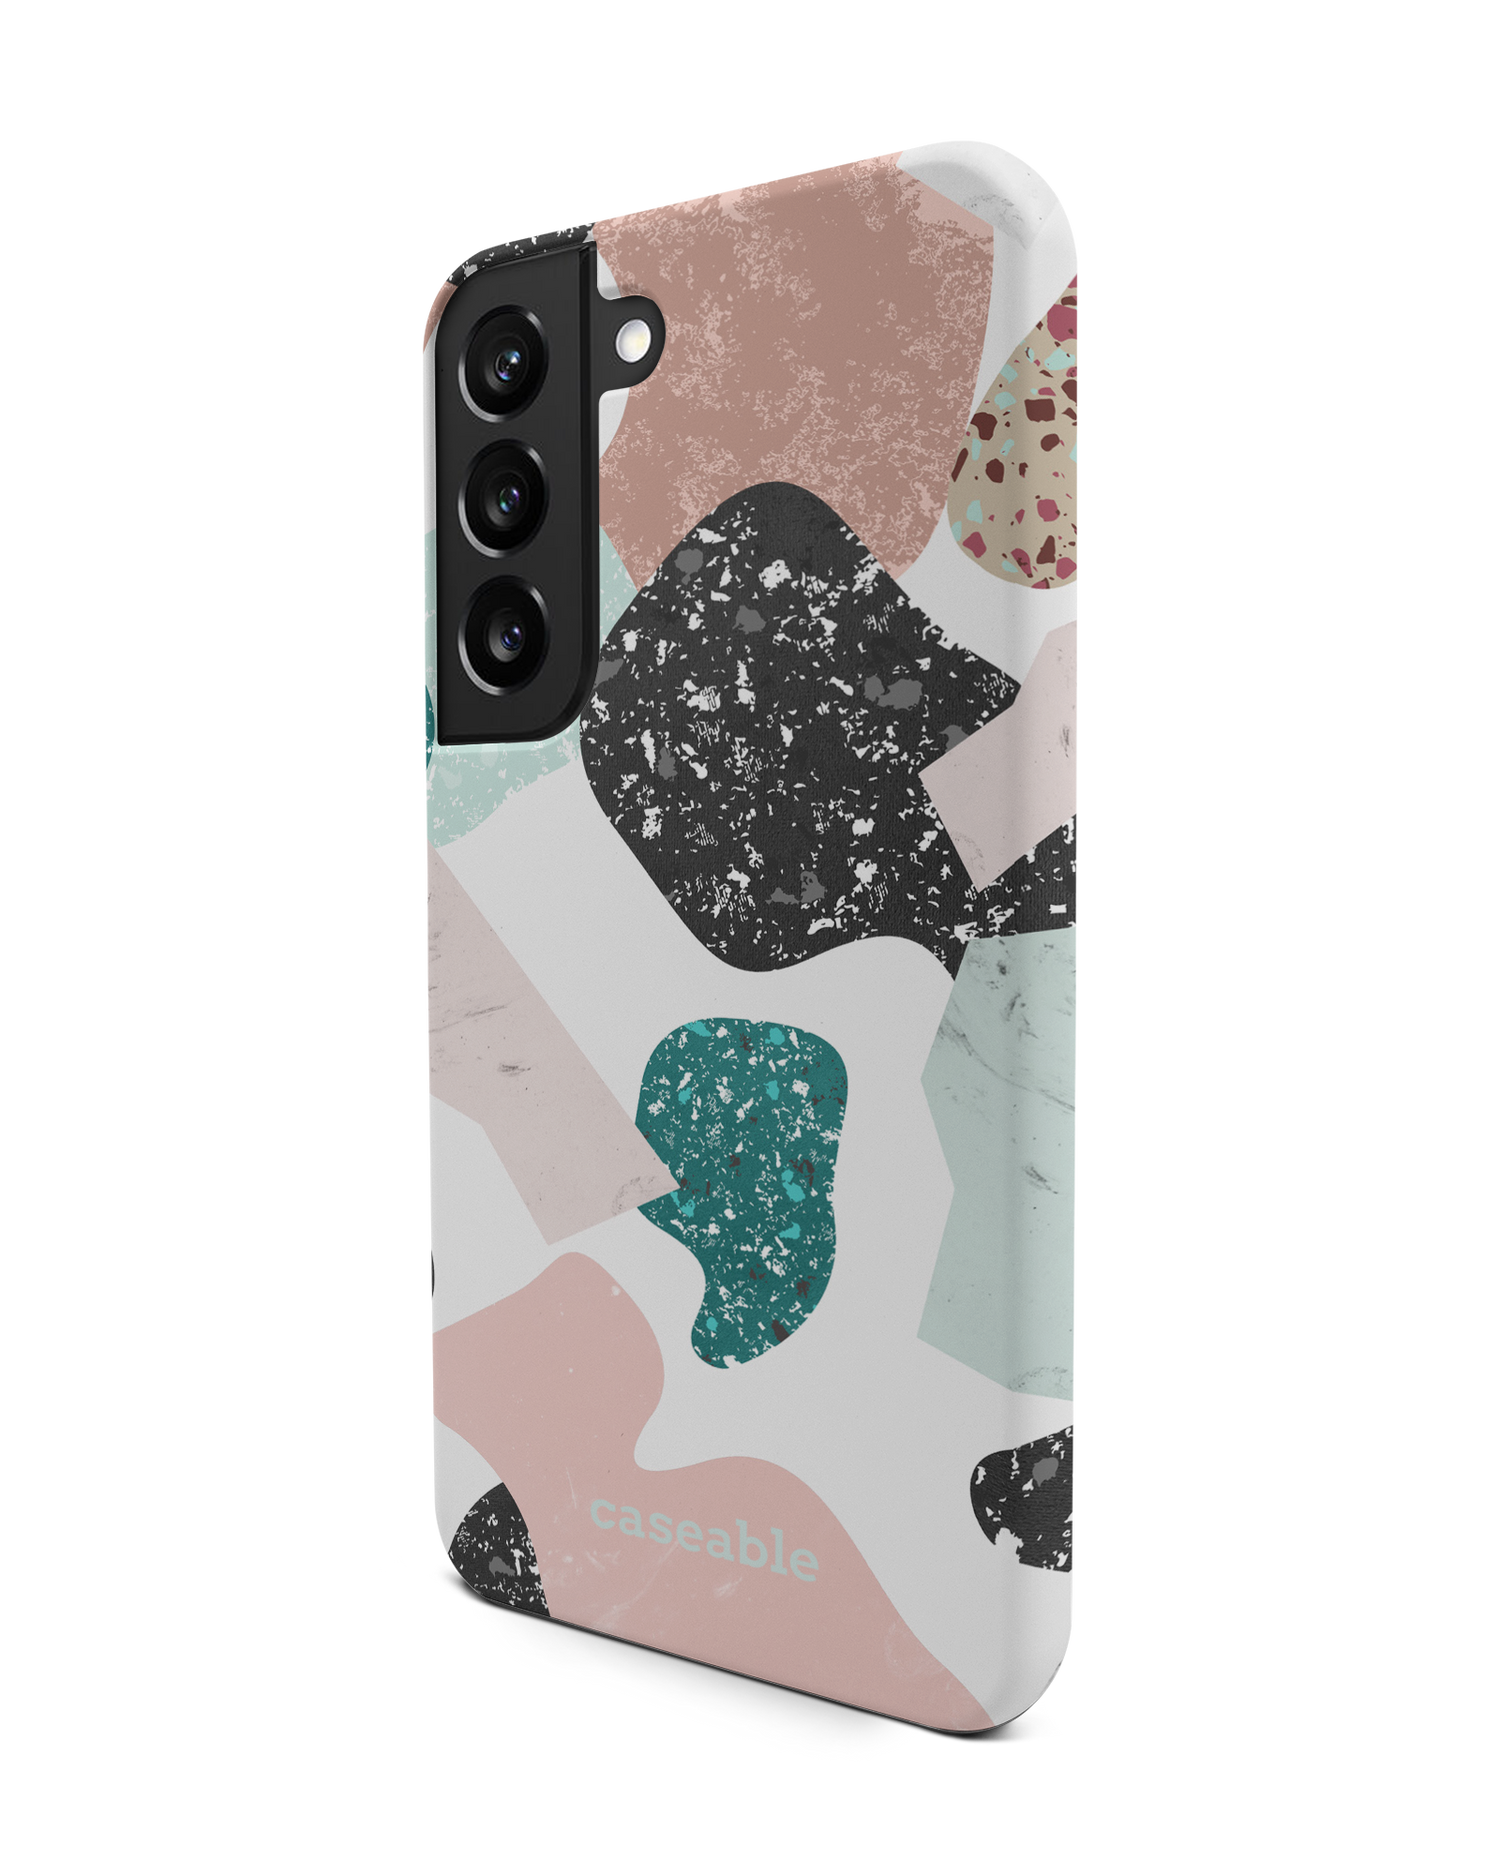 Scattered Shapes Premium Phone Case Samsung Galaxy S22 5G: View from the right side